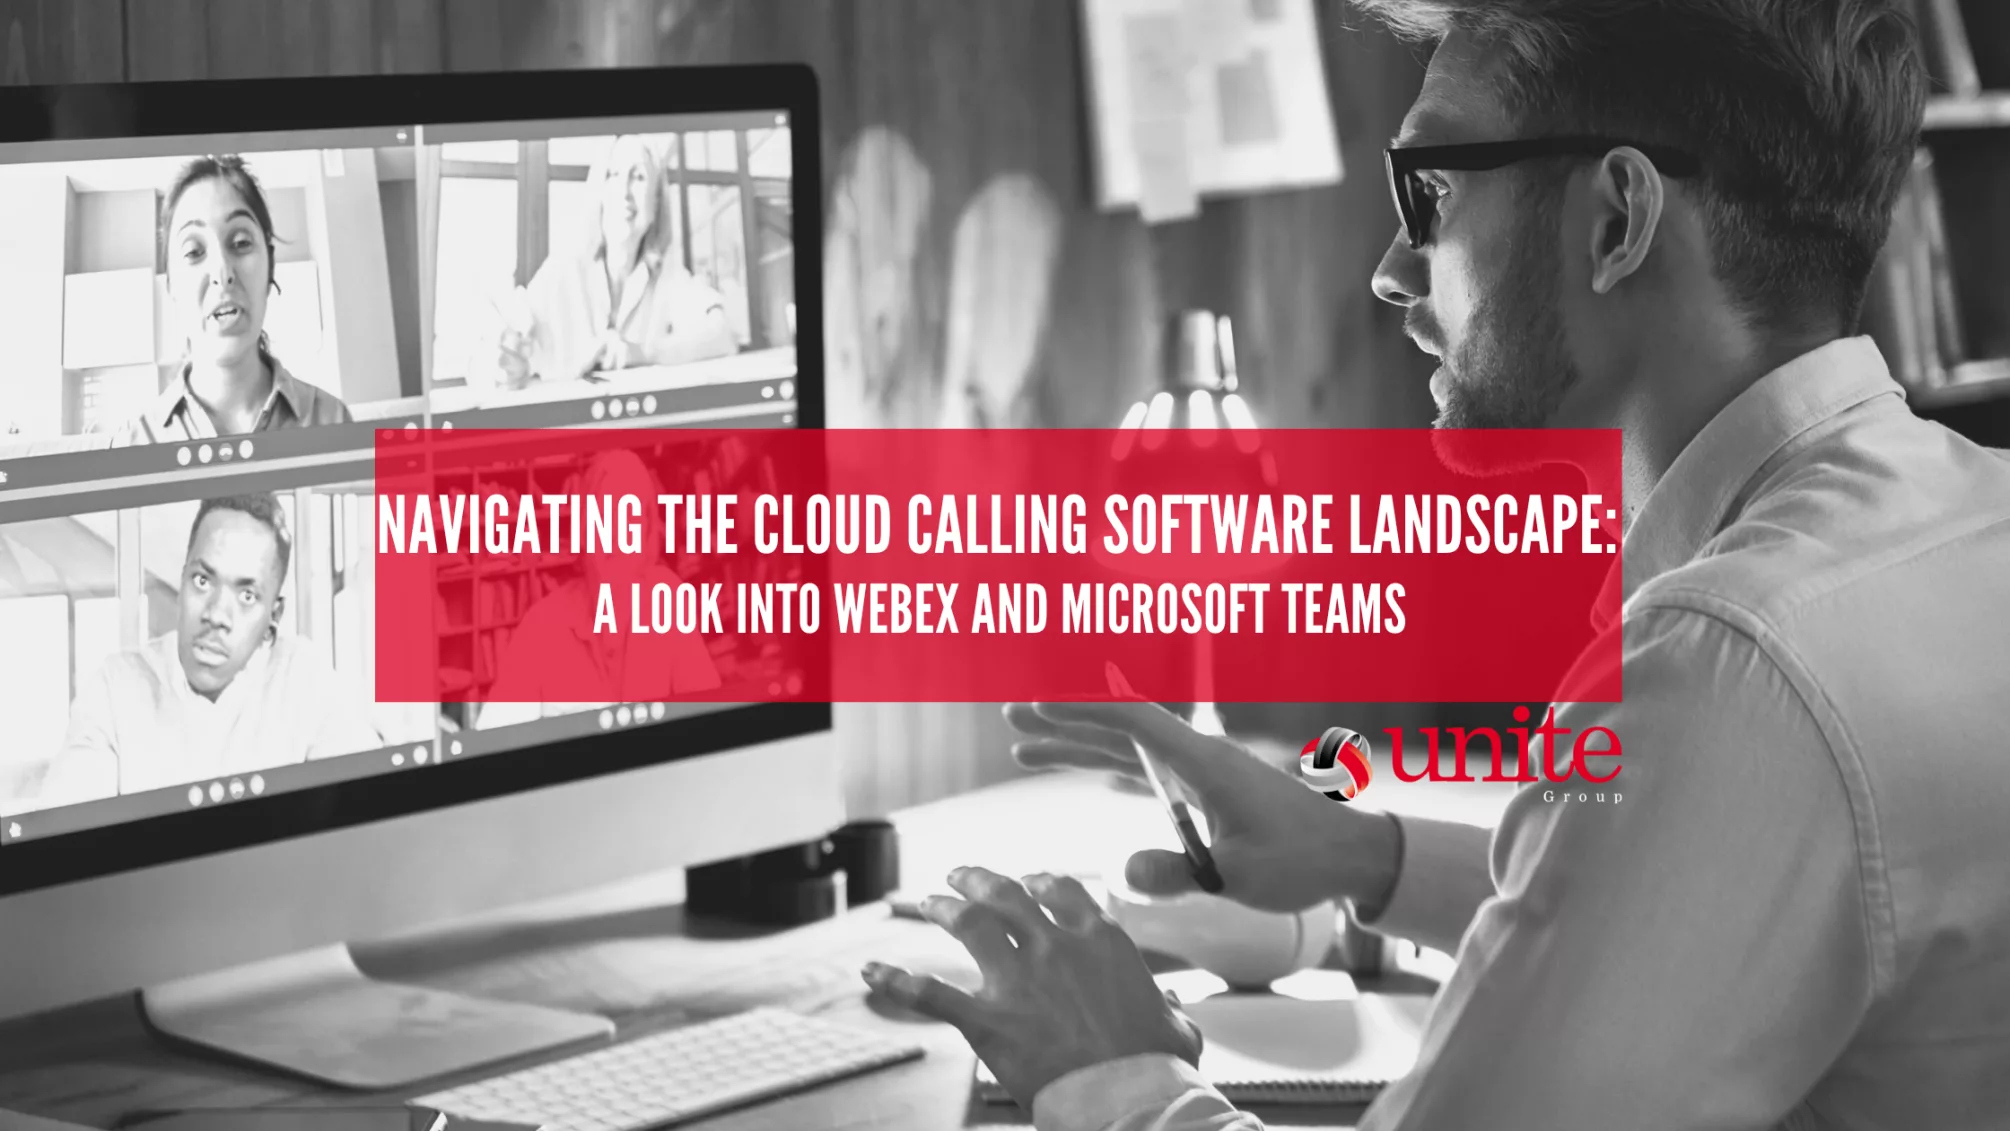 man on a video call with 4 other individuals - Navigating the Cloud Calling Software Landscape: A Look into Webex and Microsoft Teams